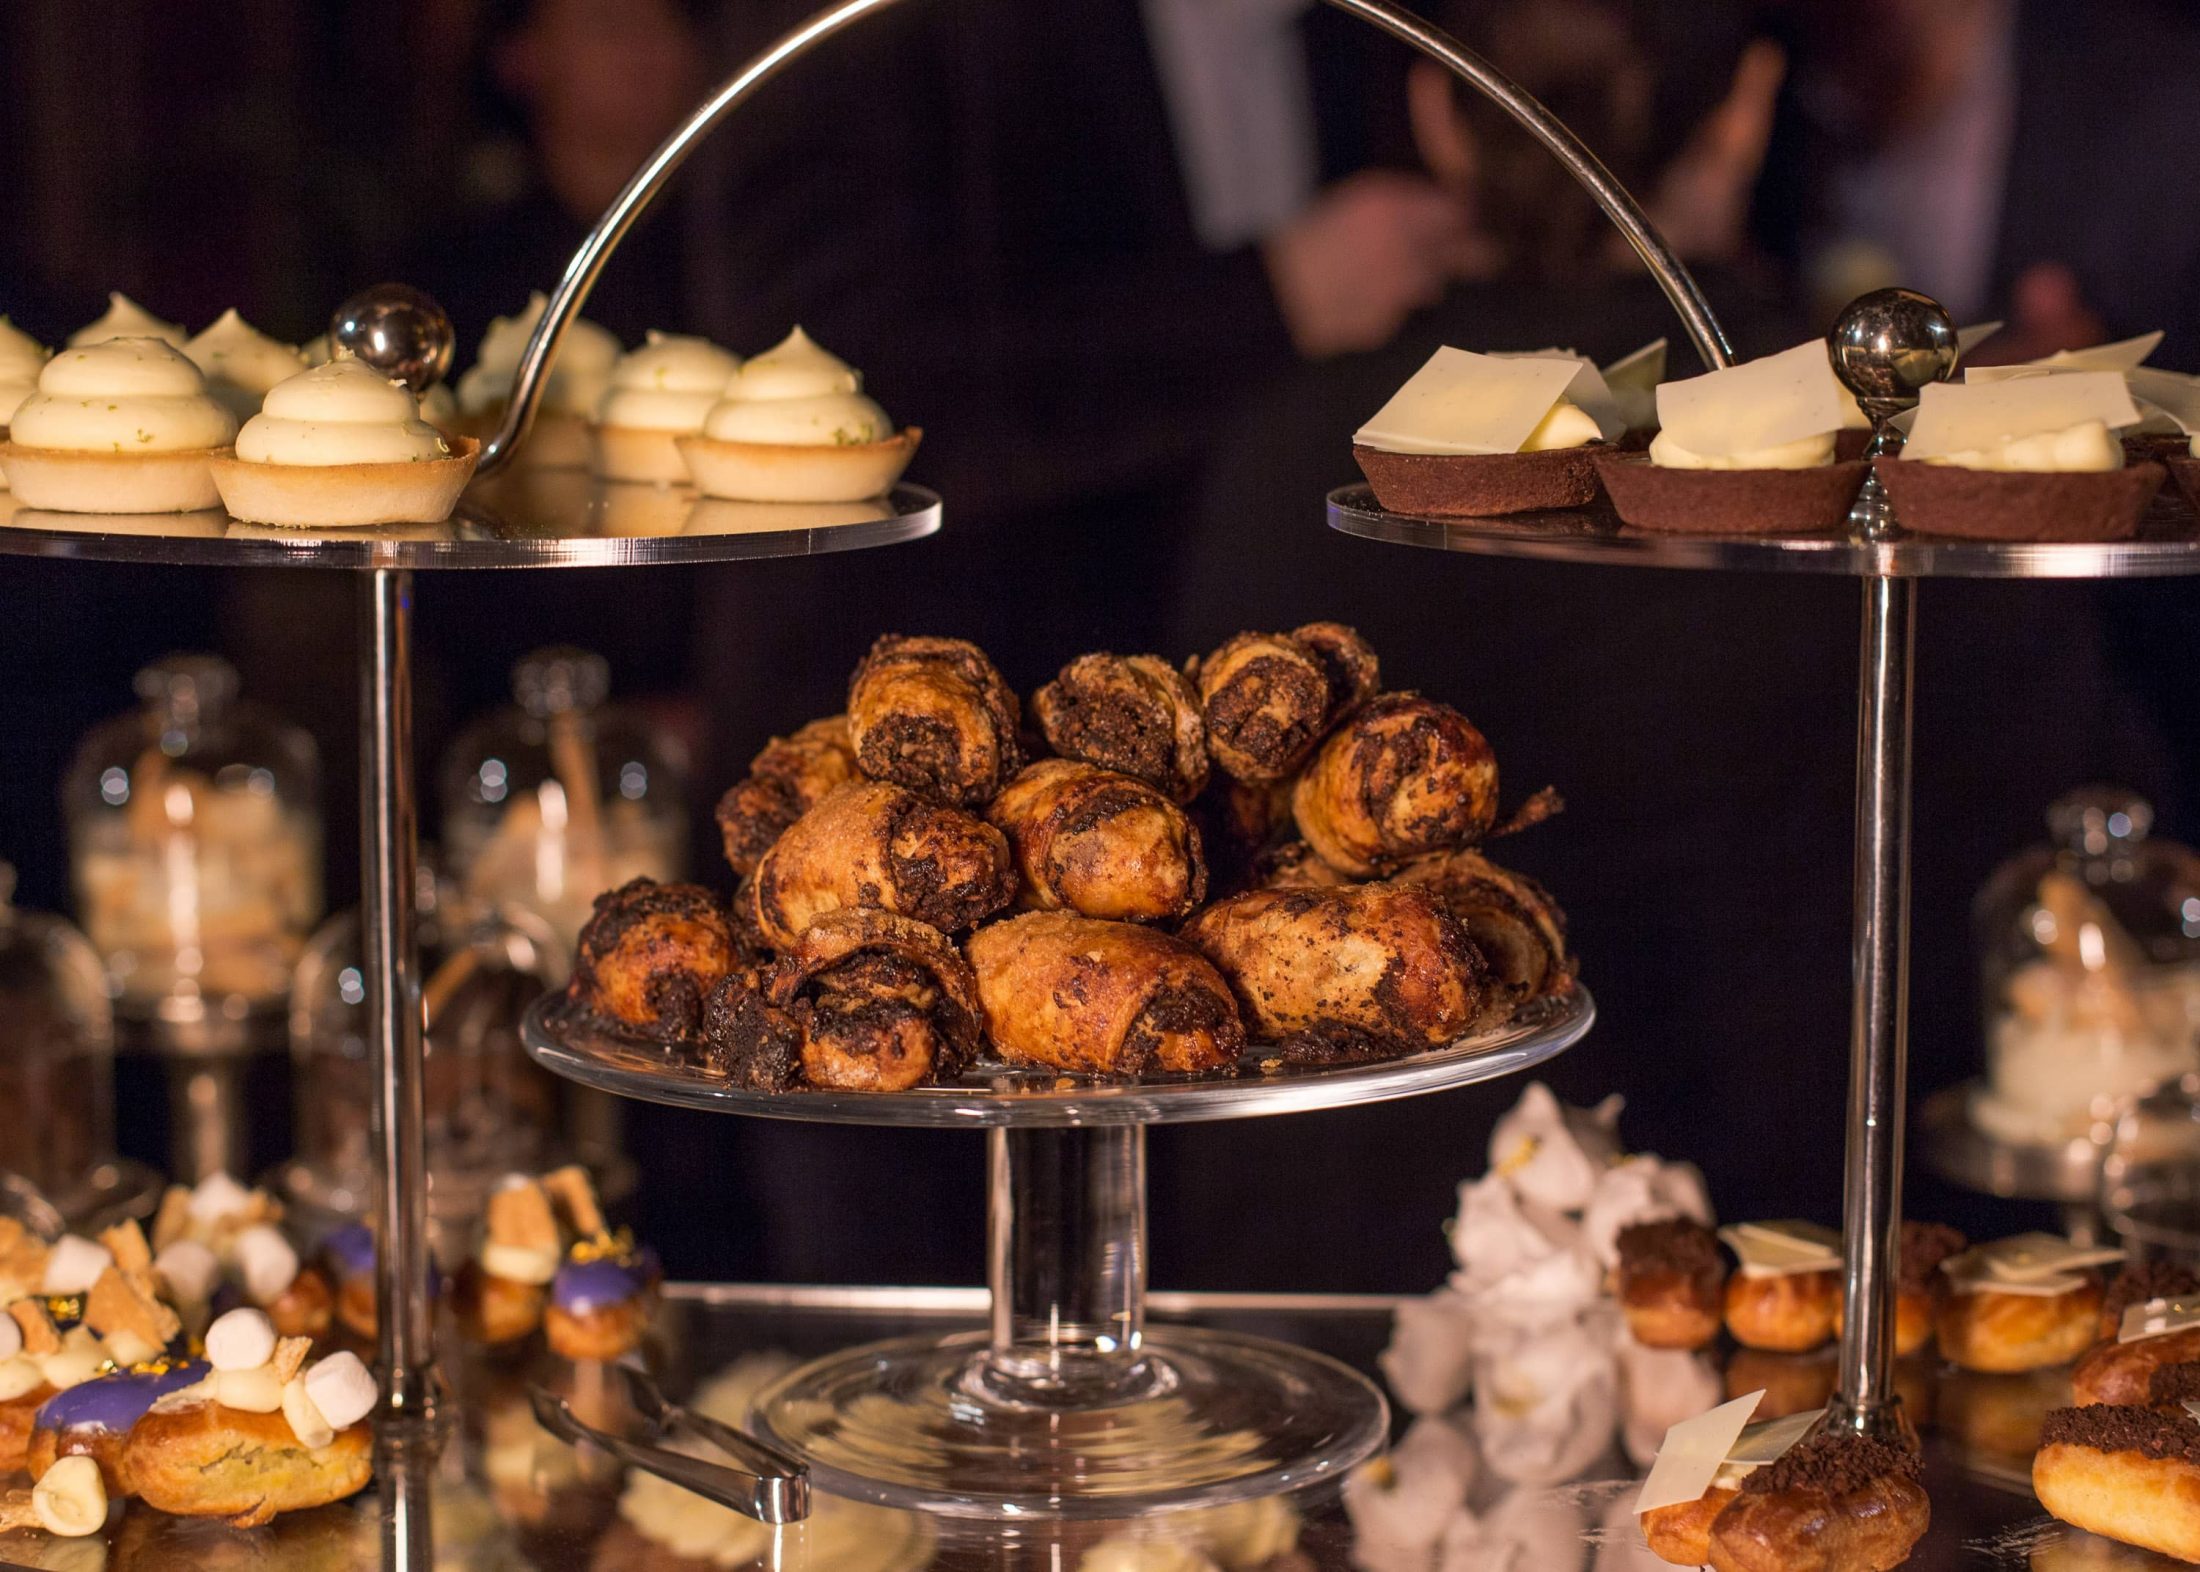 Desserts at this food festival and souk-inspired bat mitzvah in DC | Photo by Luis Zepeda